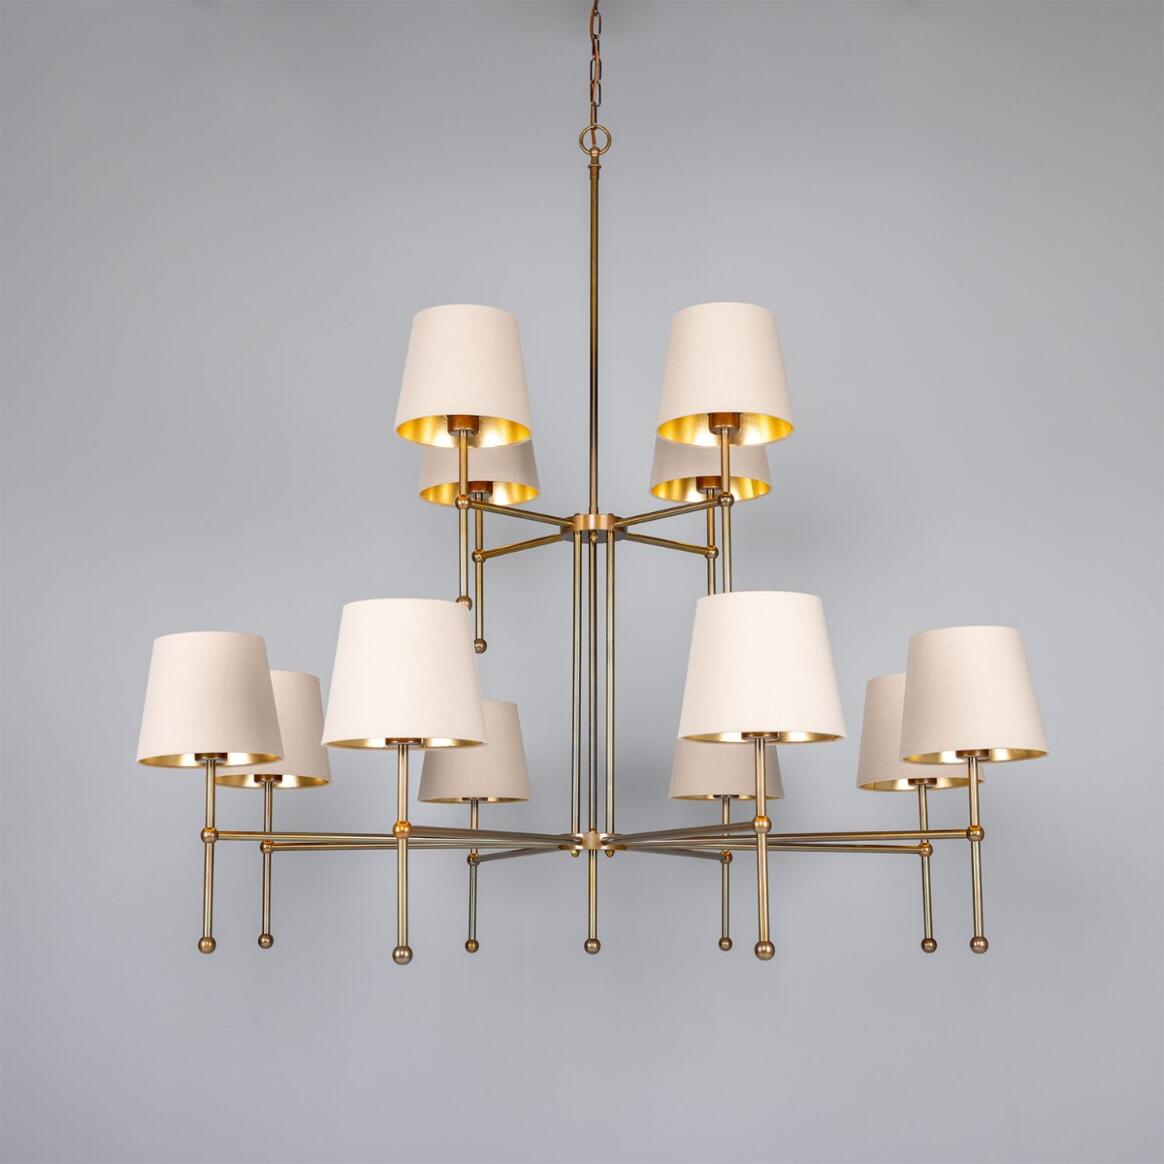 California Modern Brass Two-Tier Chandelier, 12-Arm main product image